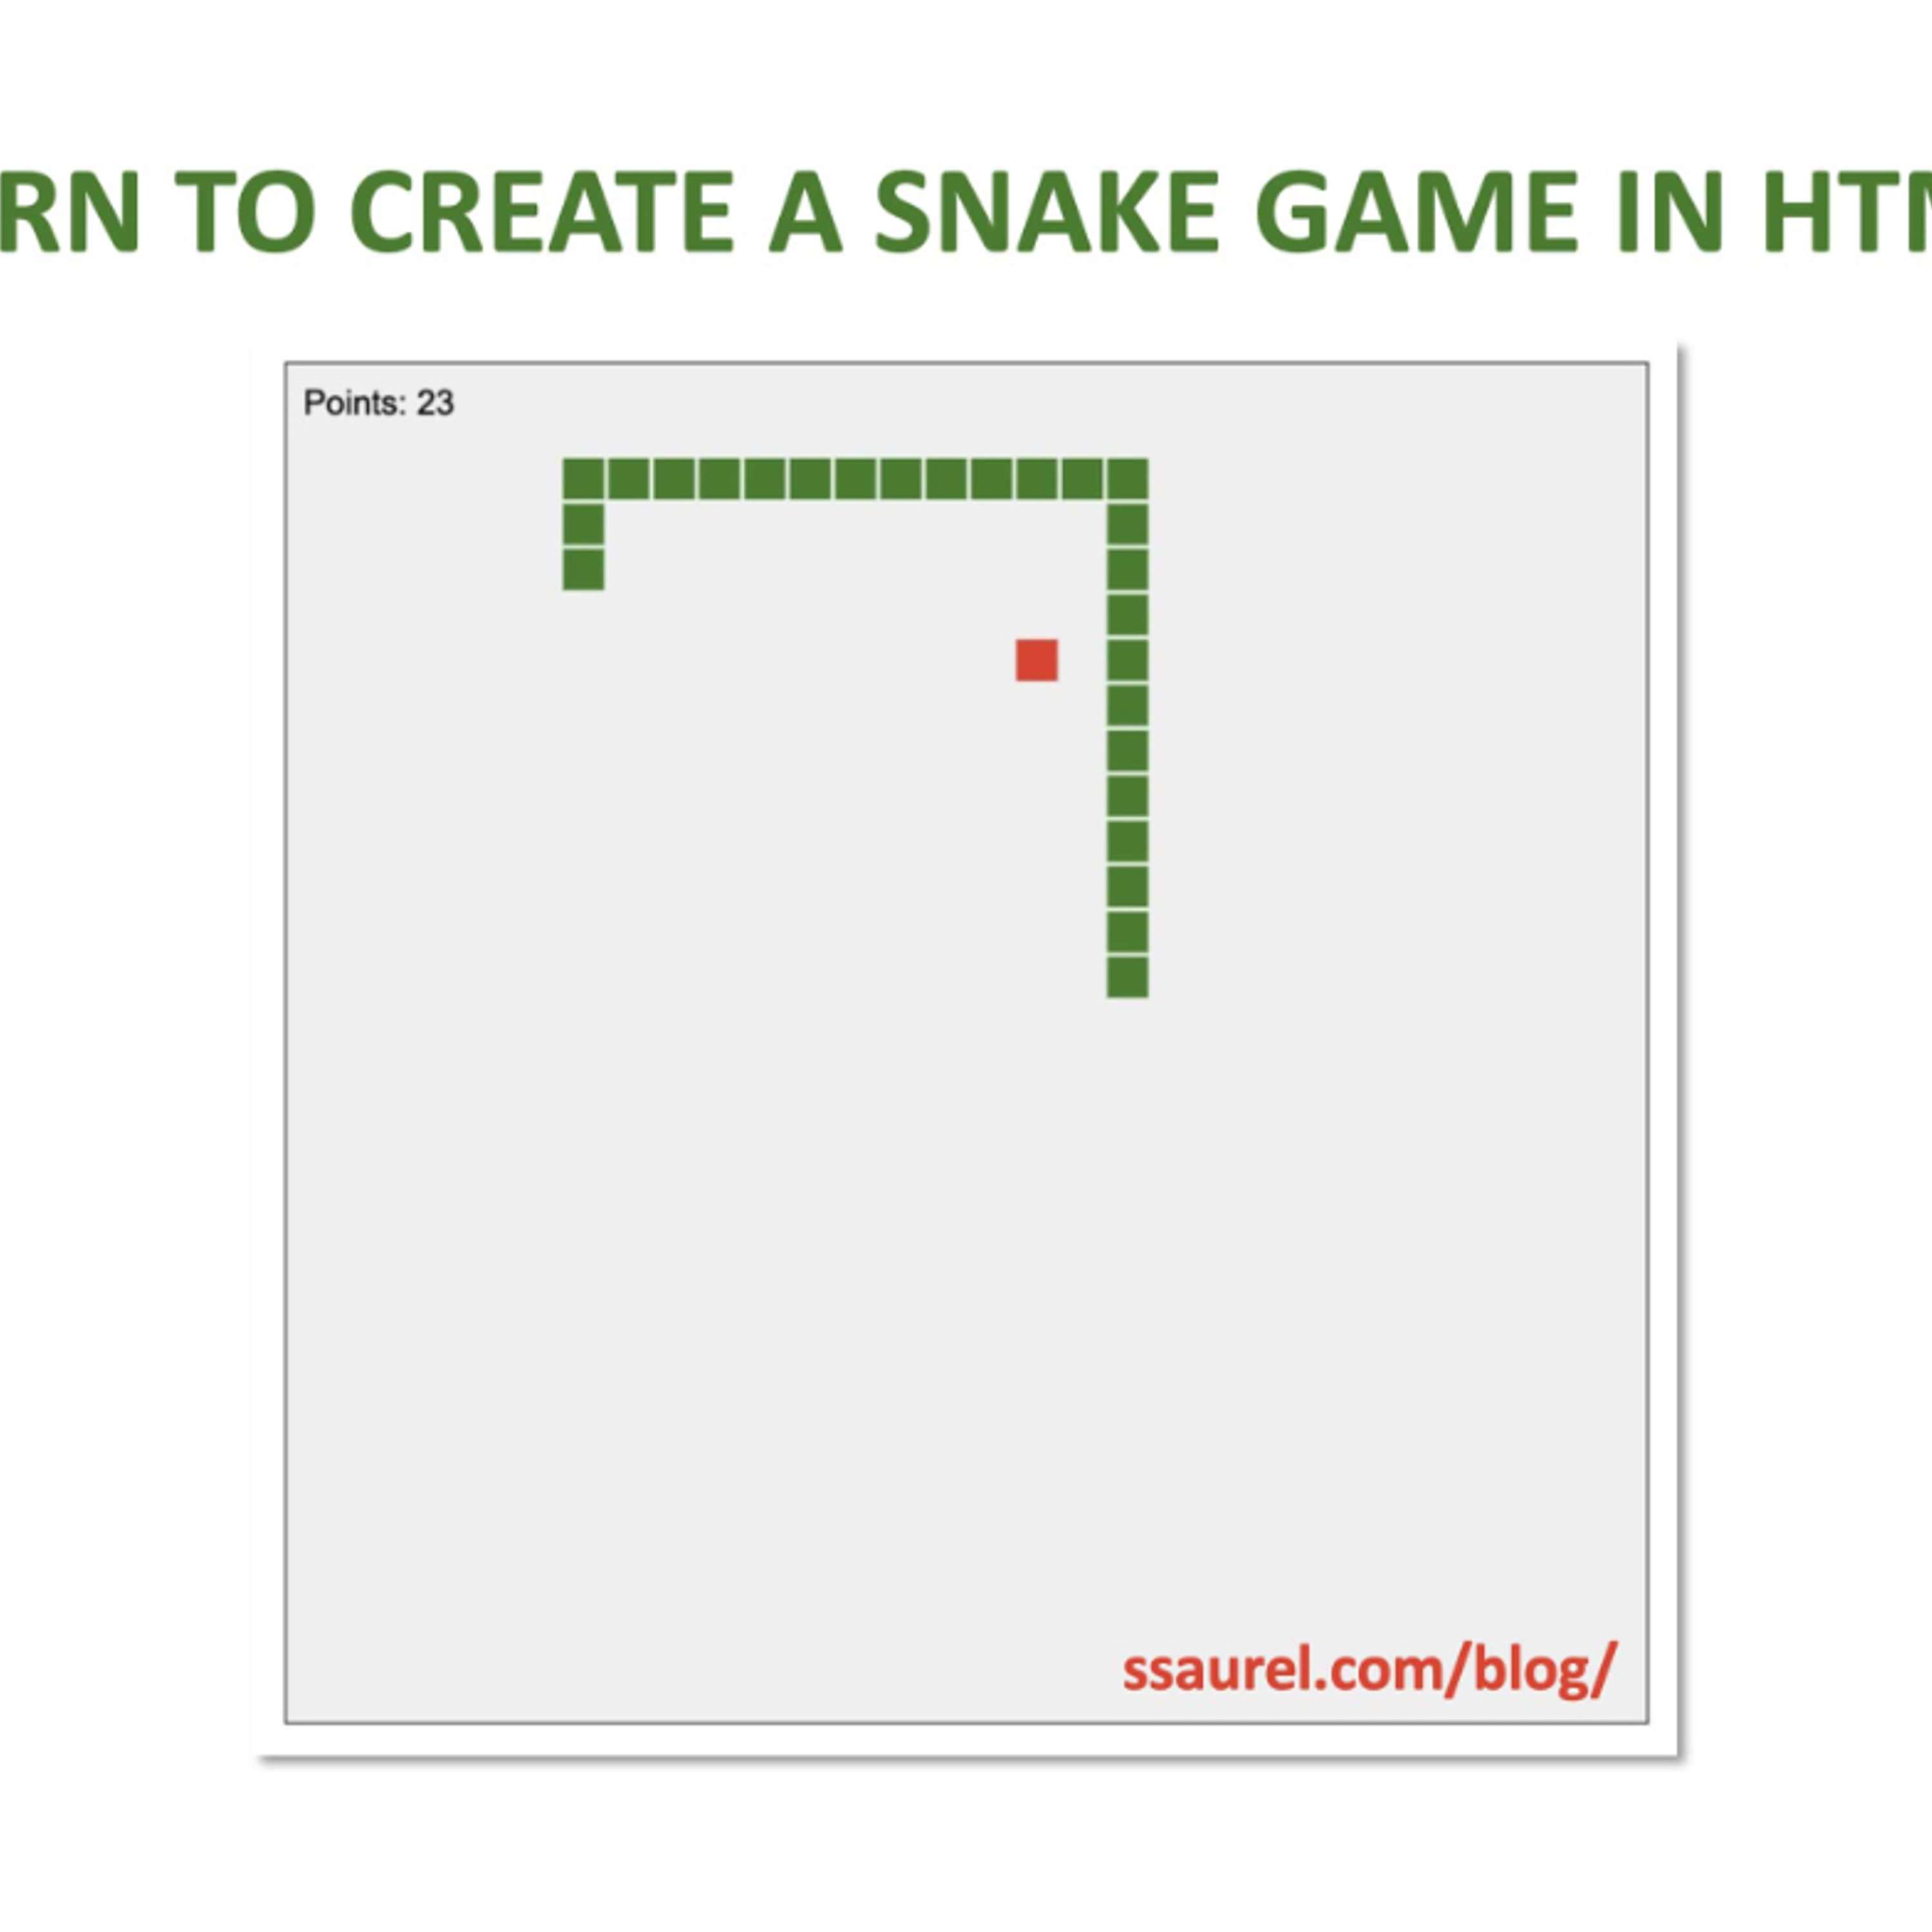 Revive Some Nostalgia: Recreating the Snake Game Using HTML5's Canvas API and JavaScript